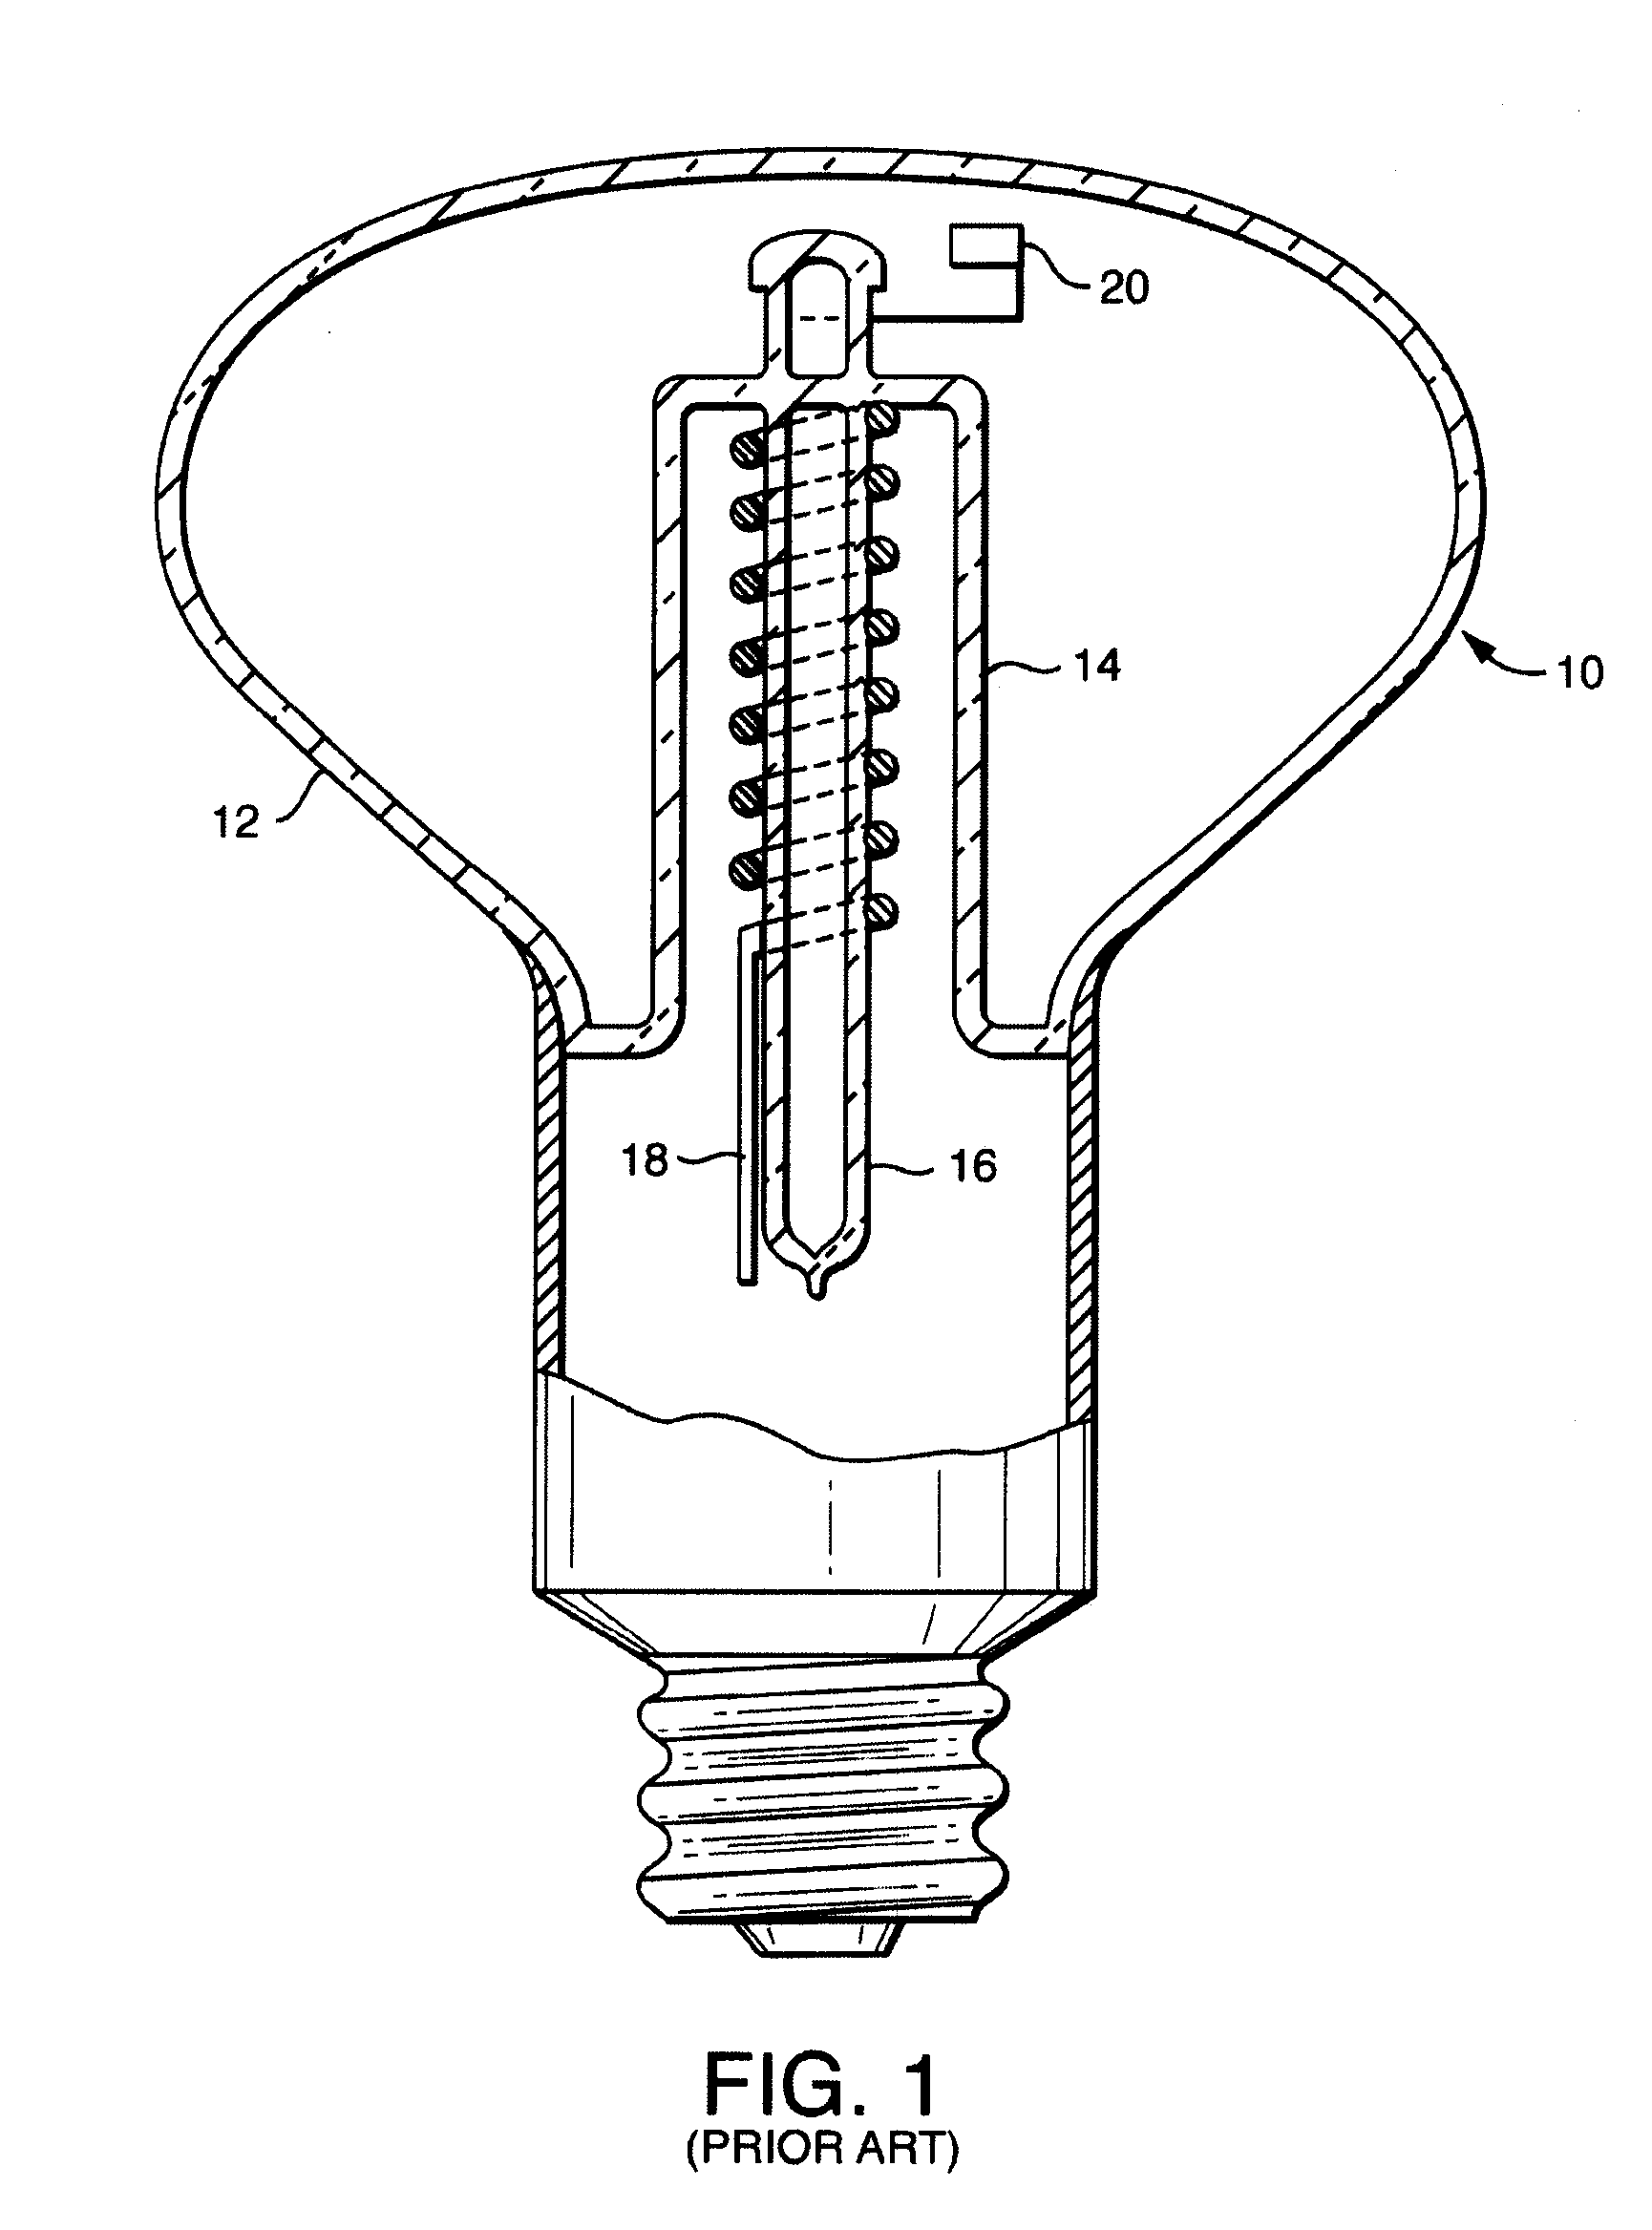 Amalgam support in an inductively coupled discharge lamp